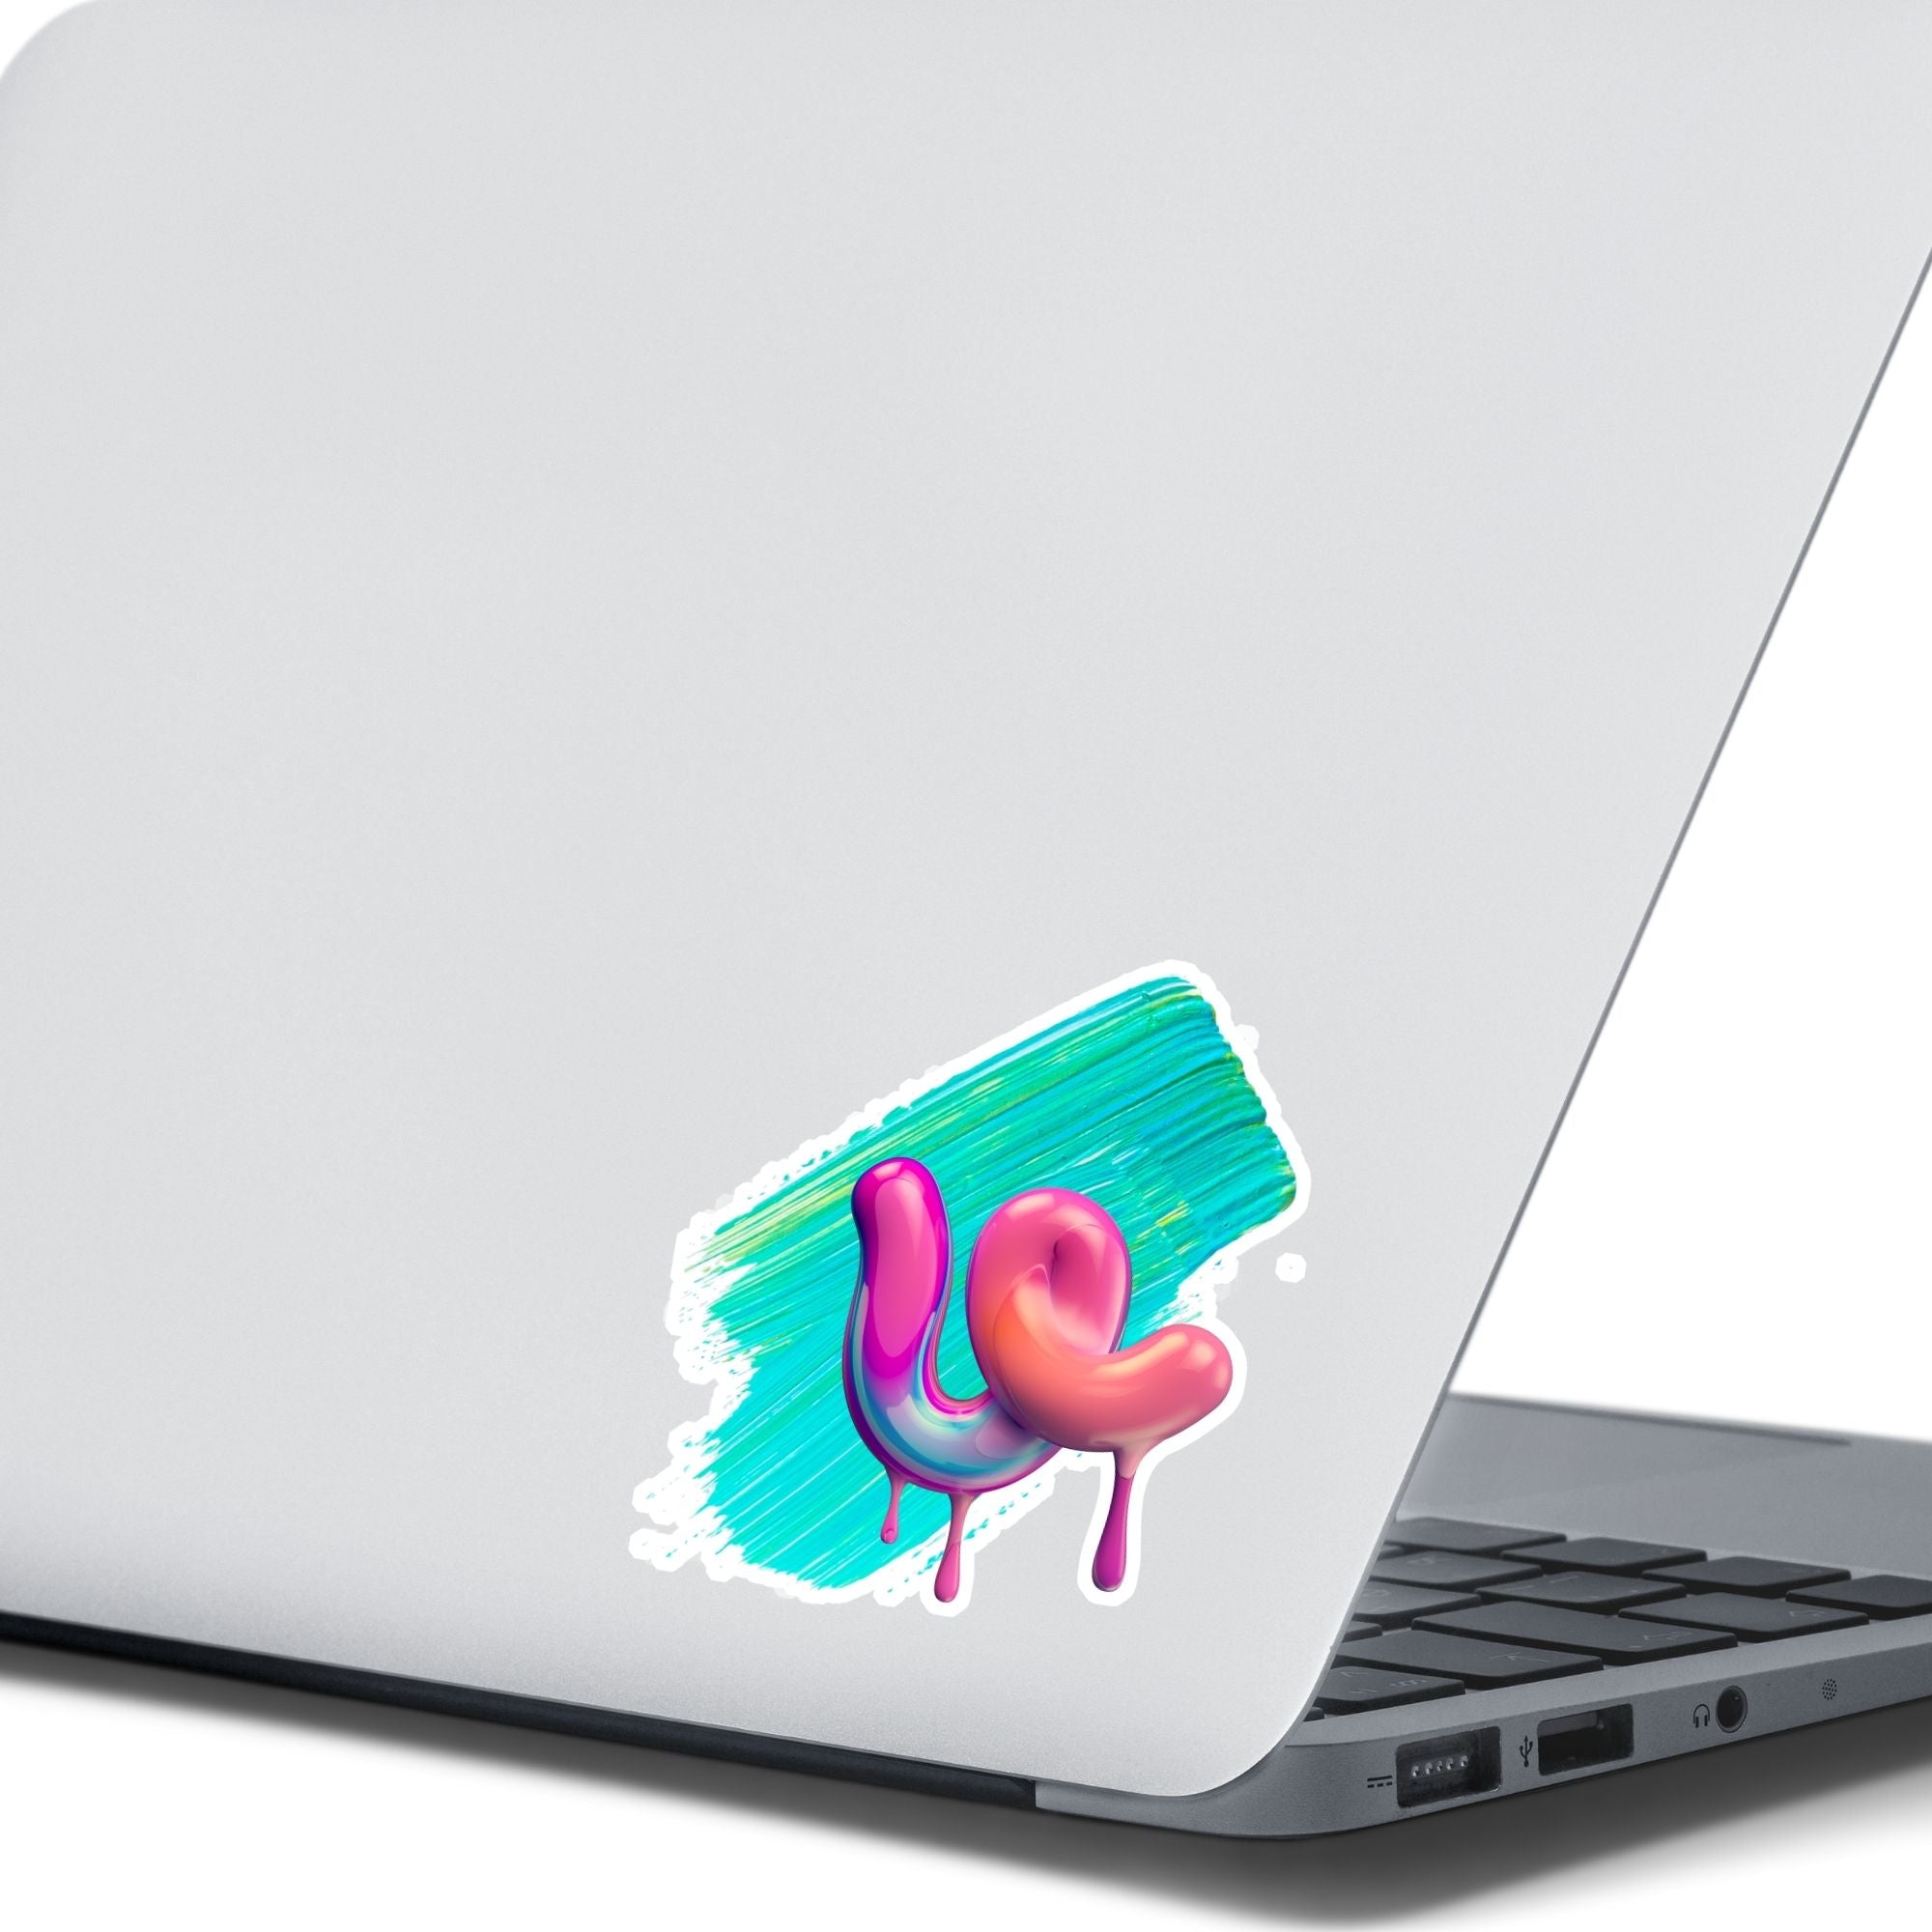 This individual die-cut sticker is one you either like or don't like; it's very unique! Featuring a 3D paint drip in pinks and purples over a green and blue paint swath, this sticker is hard to explain but pretty interesting to see. This image shows the 3D Drip sticker on the back of an open laptop.